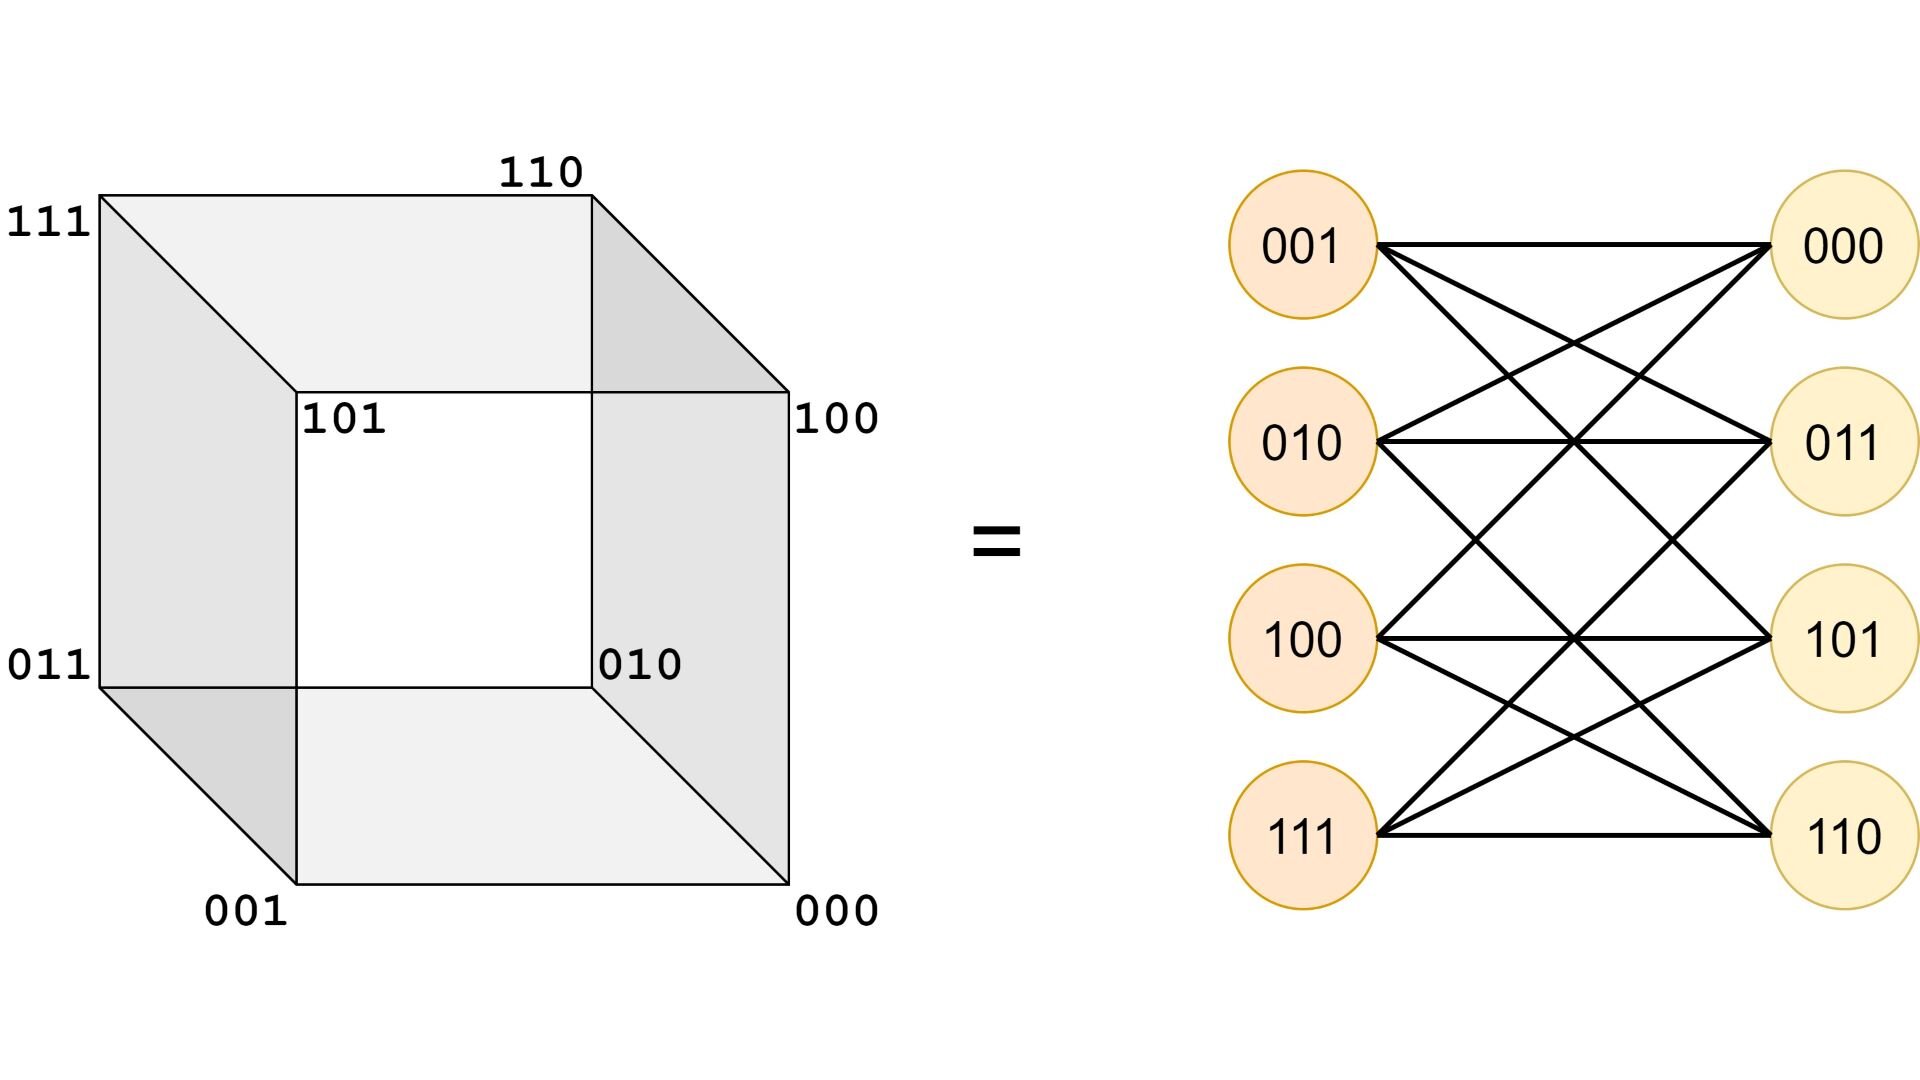 How propositional logic minimization and gray codes are connected